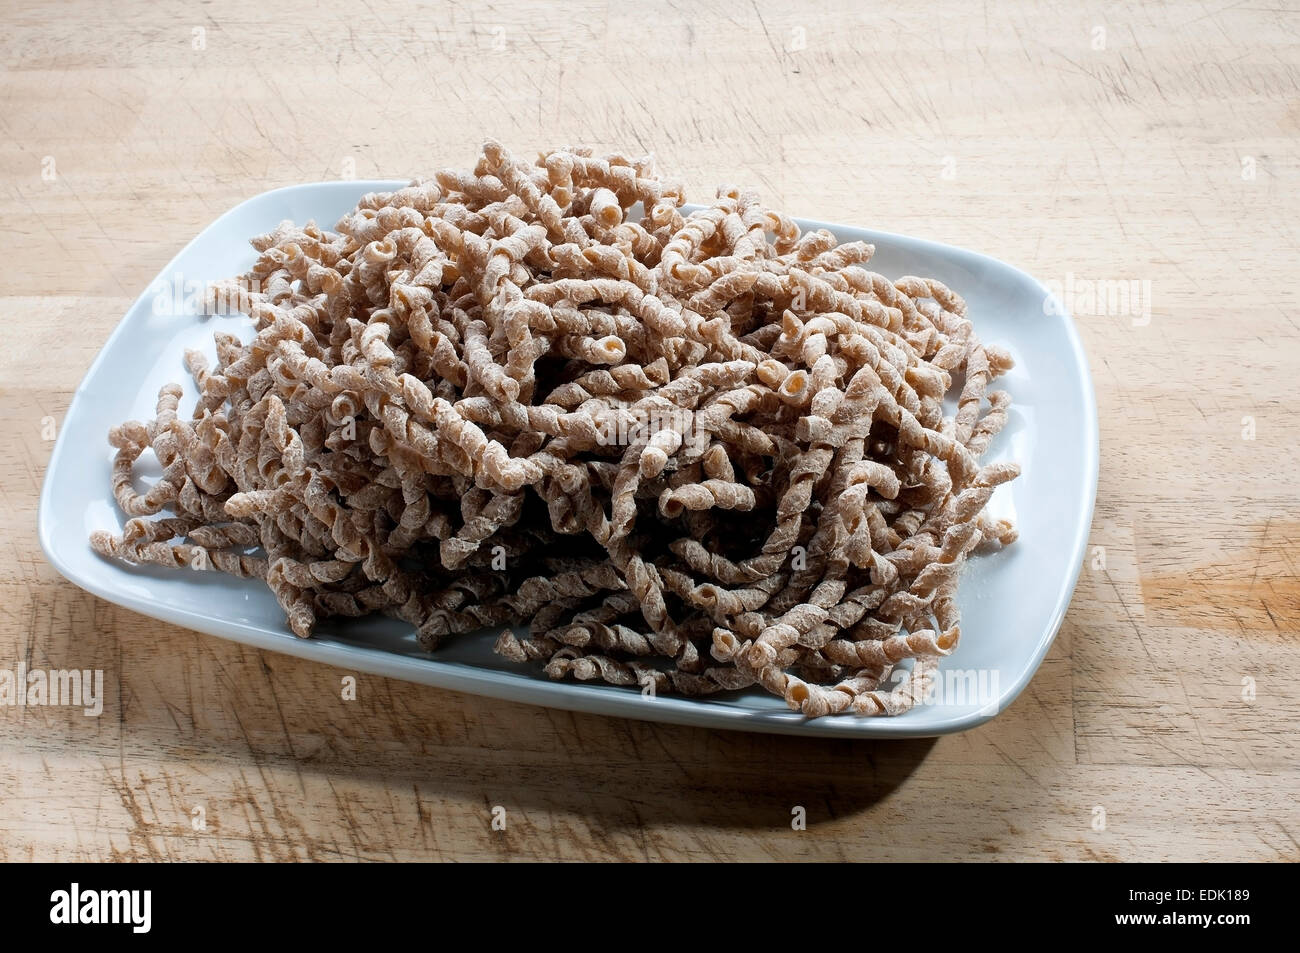 corkscrew shaped raw pasta with whole wheat flour, buckwheat typical of Sicily Stock Photo